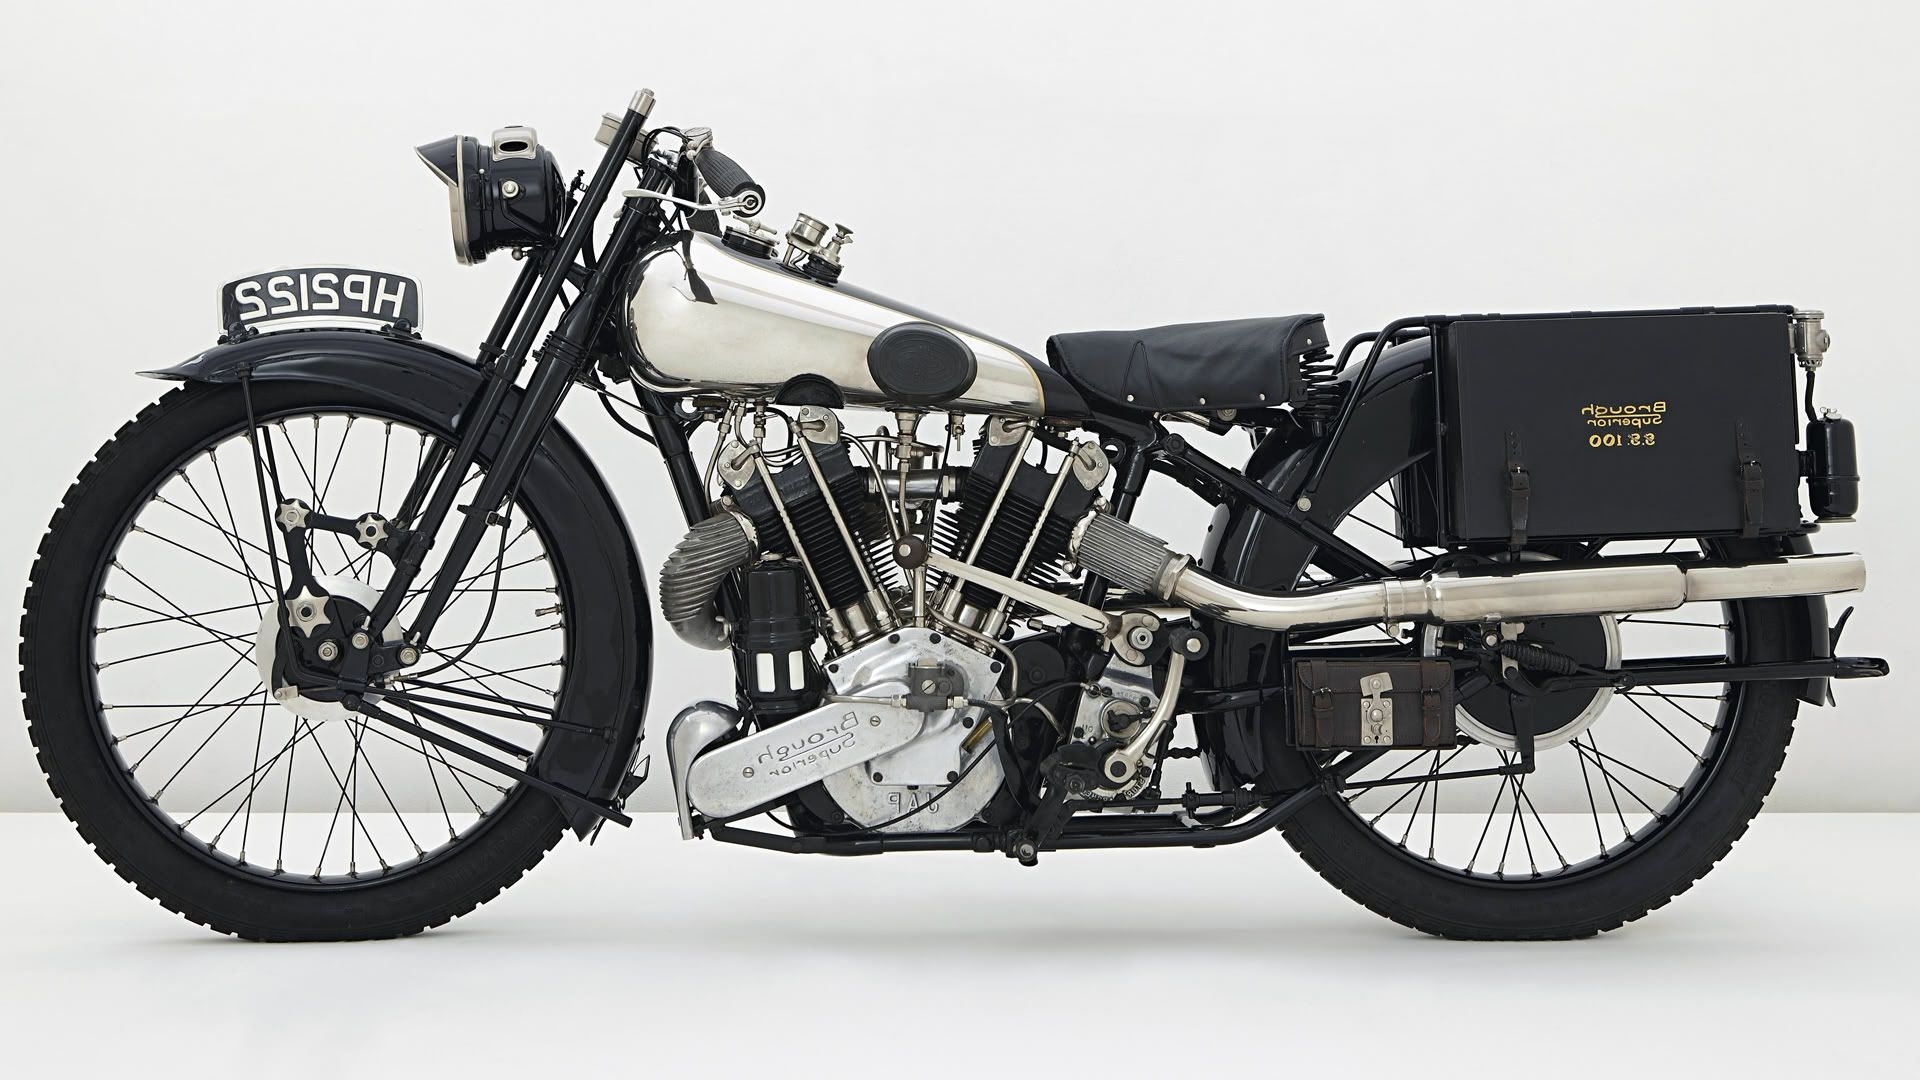 Vintage Motorcycle Wallpaper High Definition